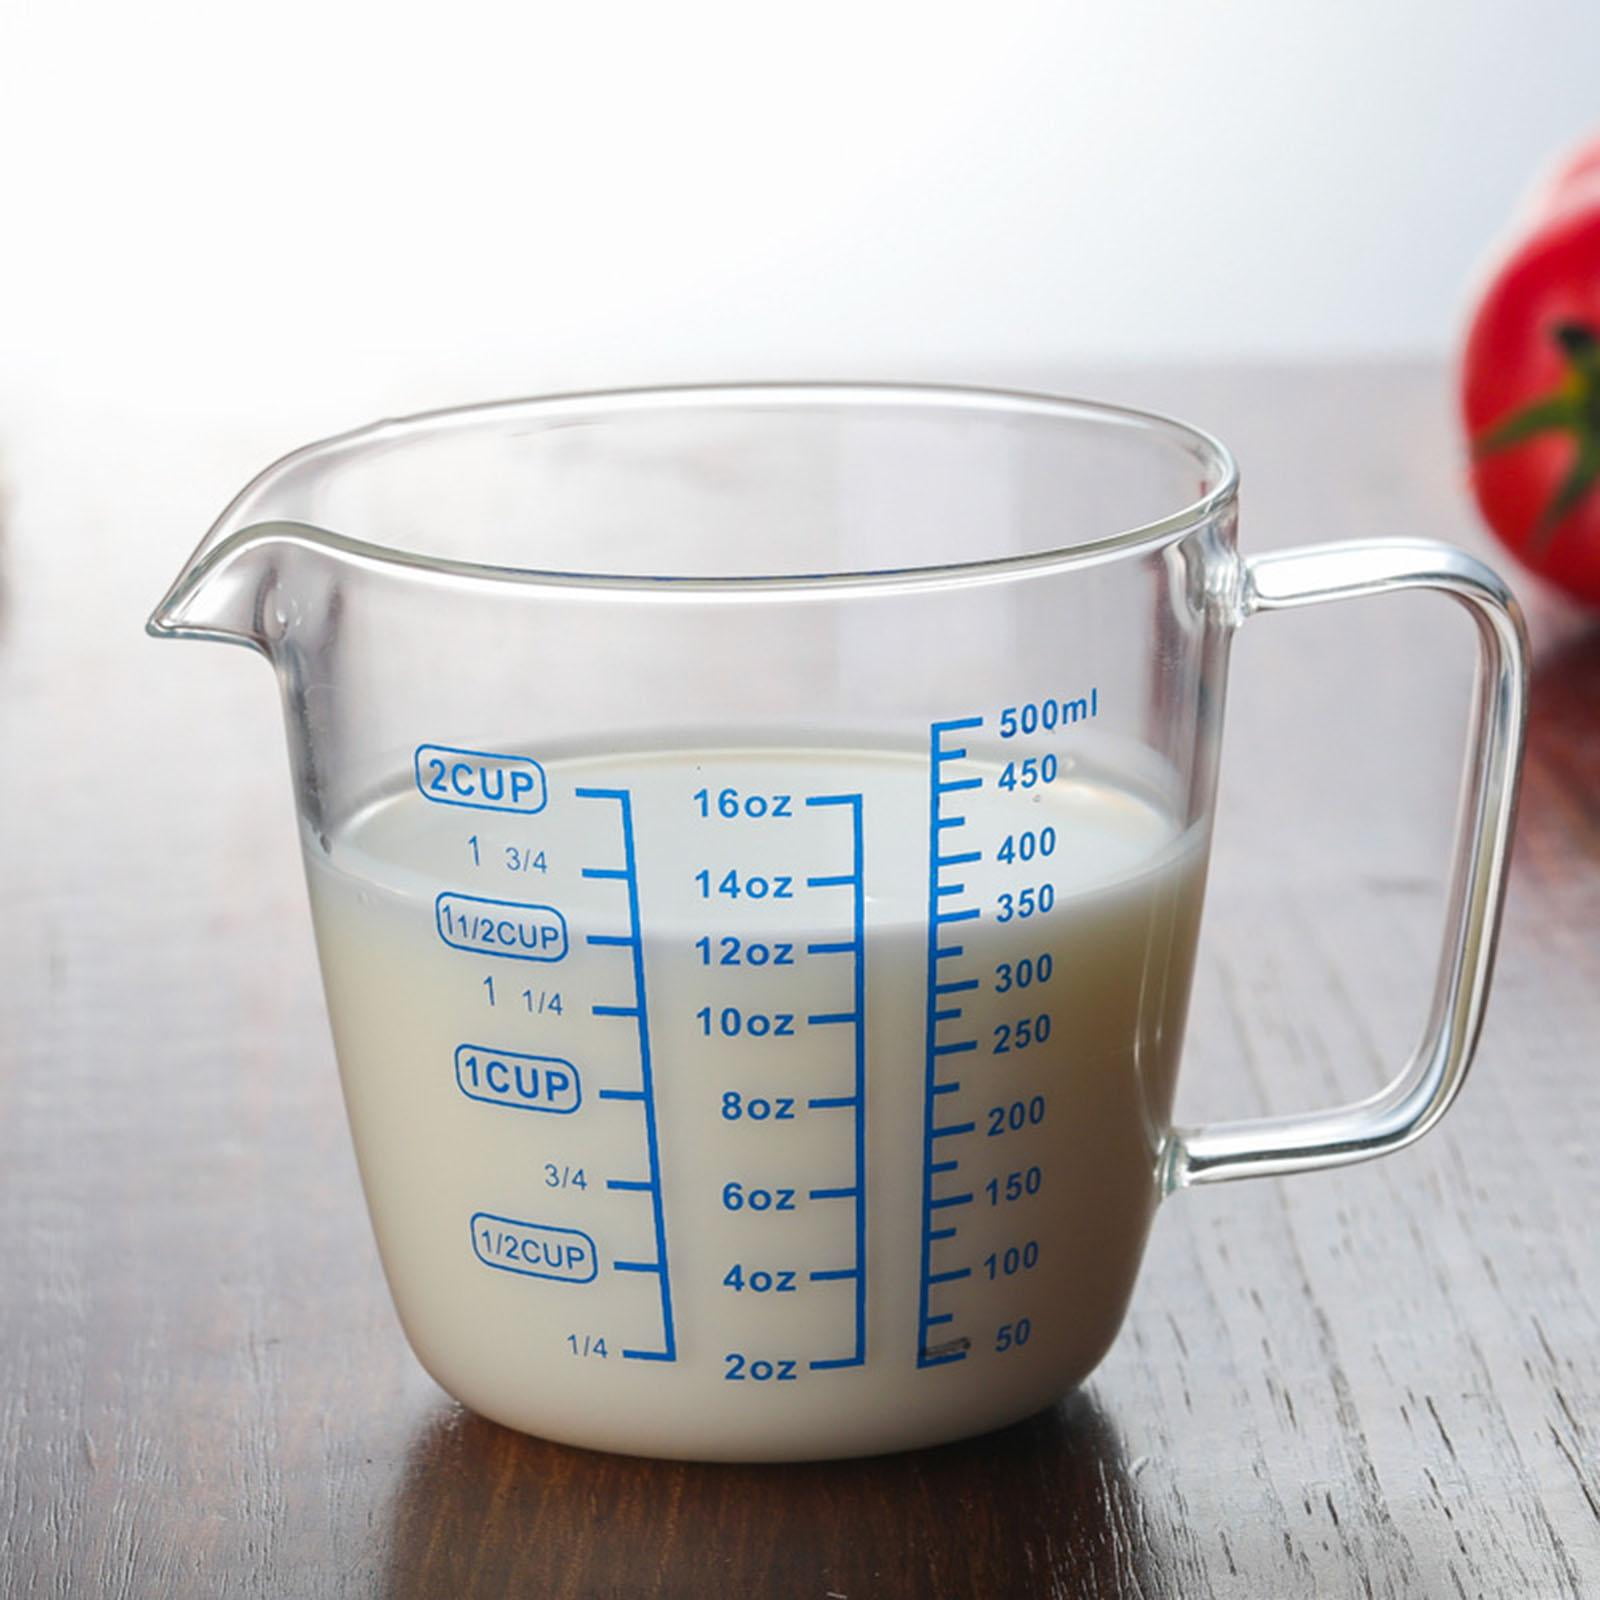 250/500ml Measuring Mug Microwave Safe Scale Marking Cup Heat Resistant with Handle Measuring Tools for Baking Cooking - 10x8.5x6CM